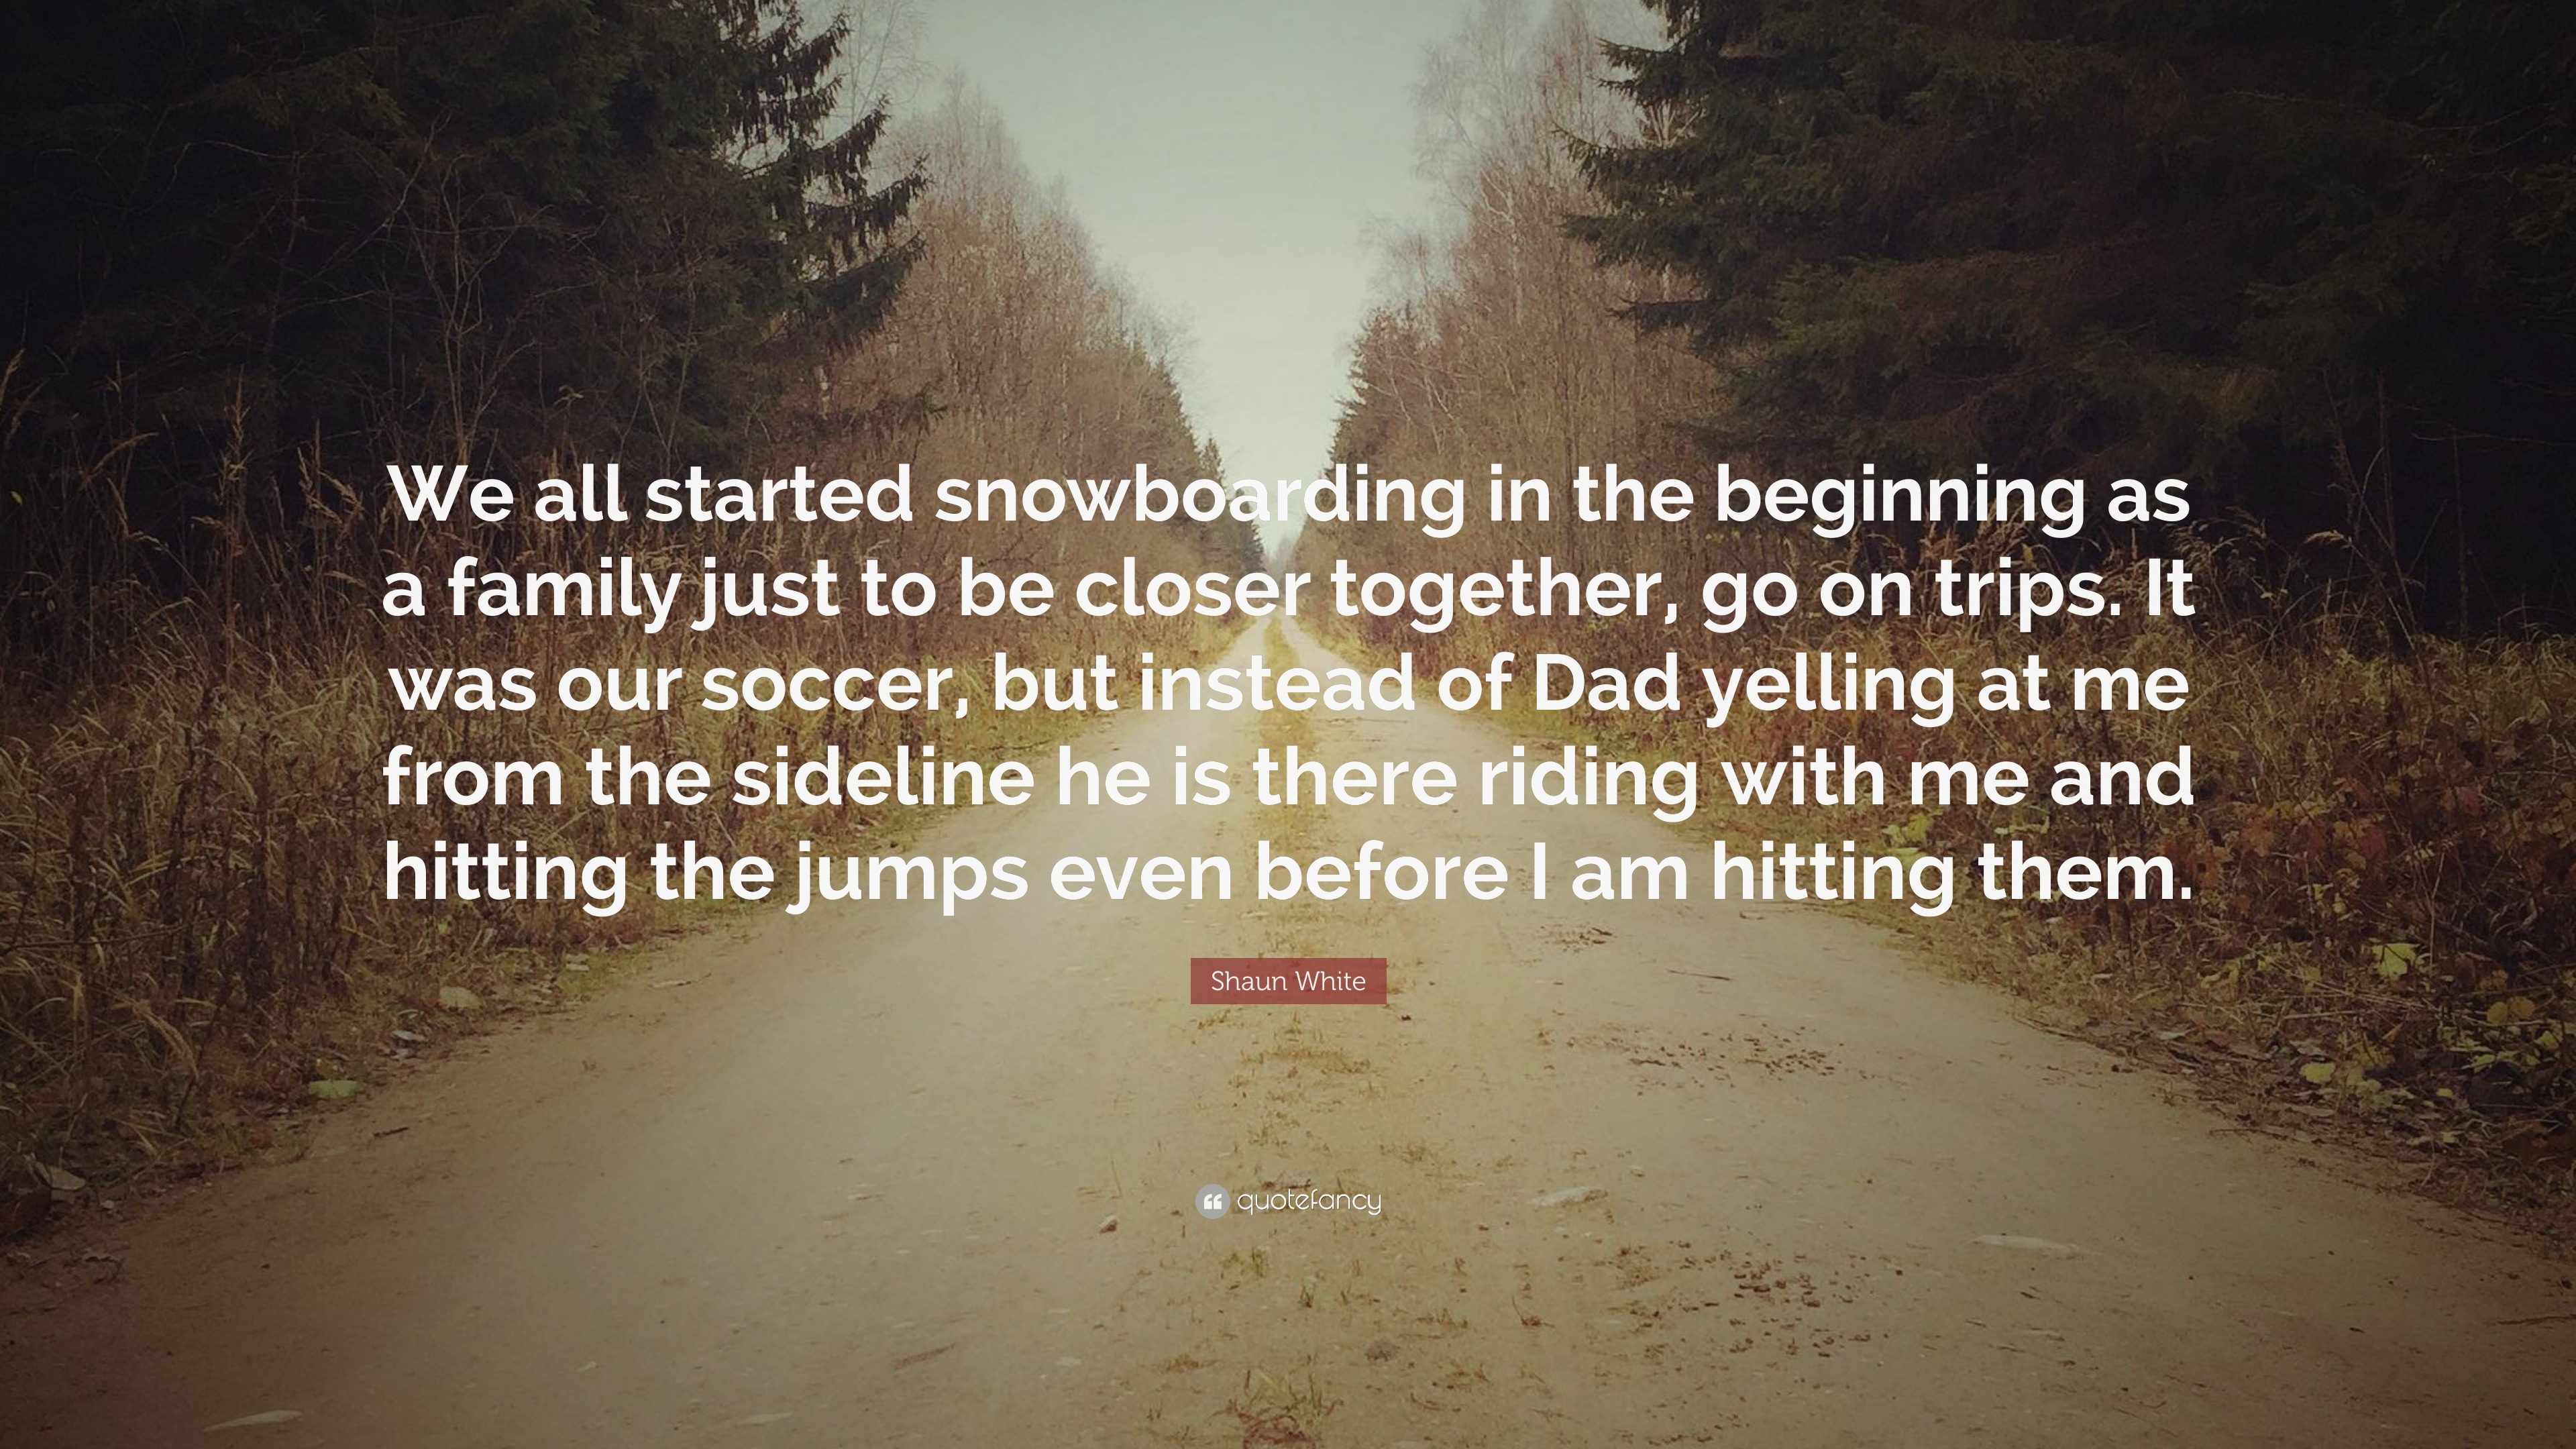 https://quotefancy.com/media/wallpaper/3840x2160/771093-Shaun-White-Quote-We-all-started-snowboarding-in-the-beginning-as.jpg